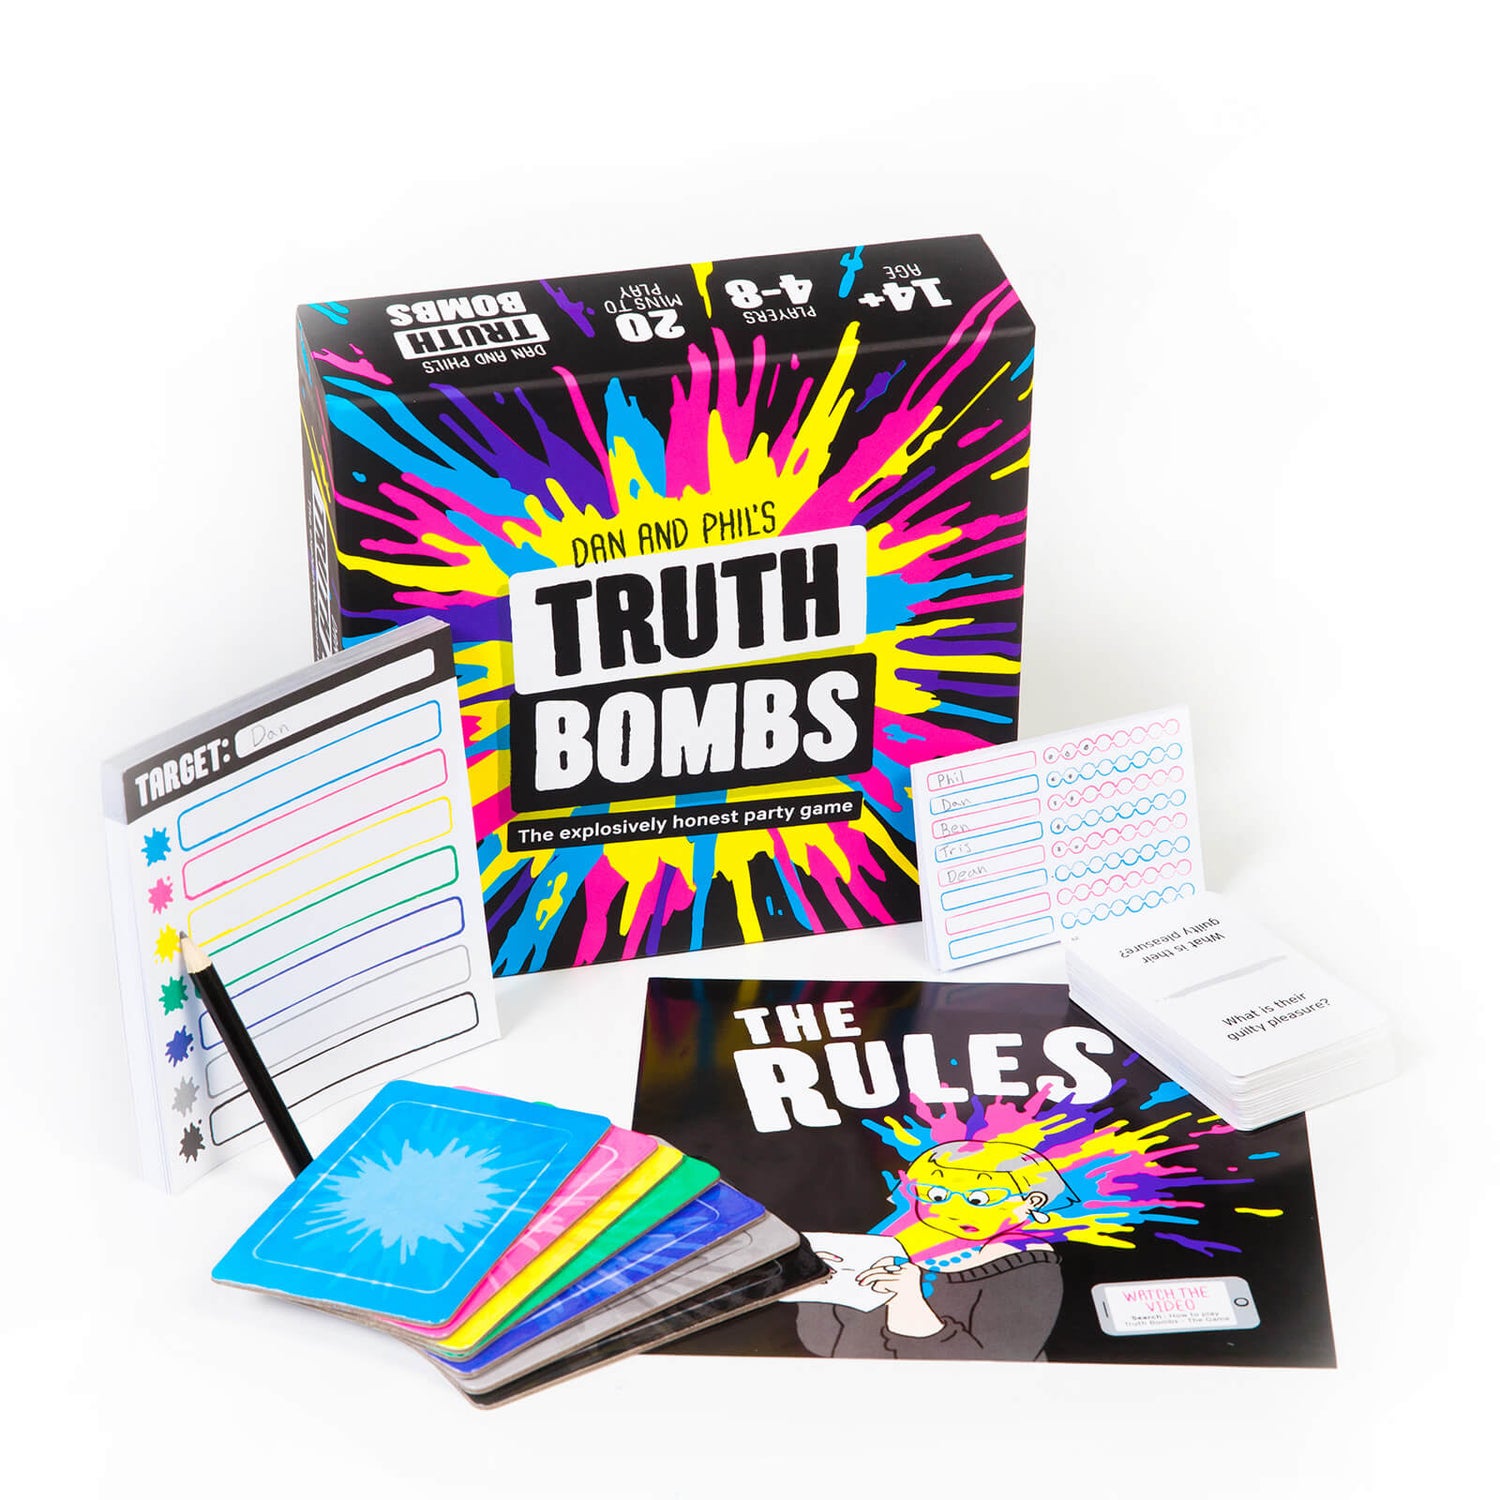 Dan and Phil's Truth Bombs Party Game